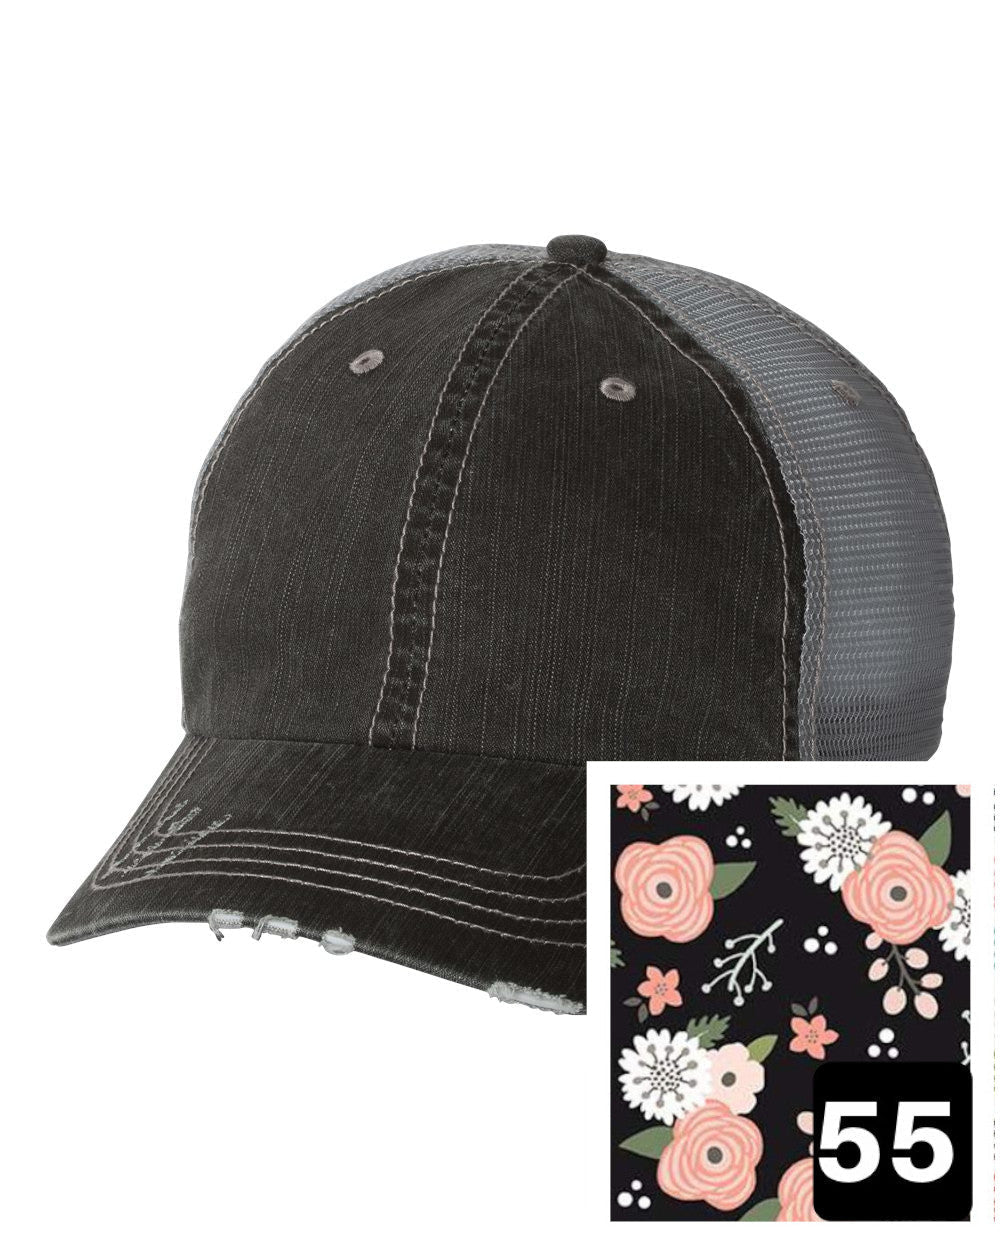 gray distressed trucker hat with petite floral on navy fabric state of Alaska